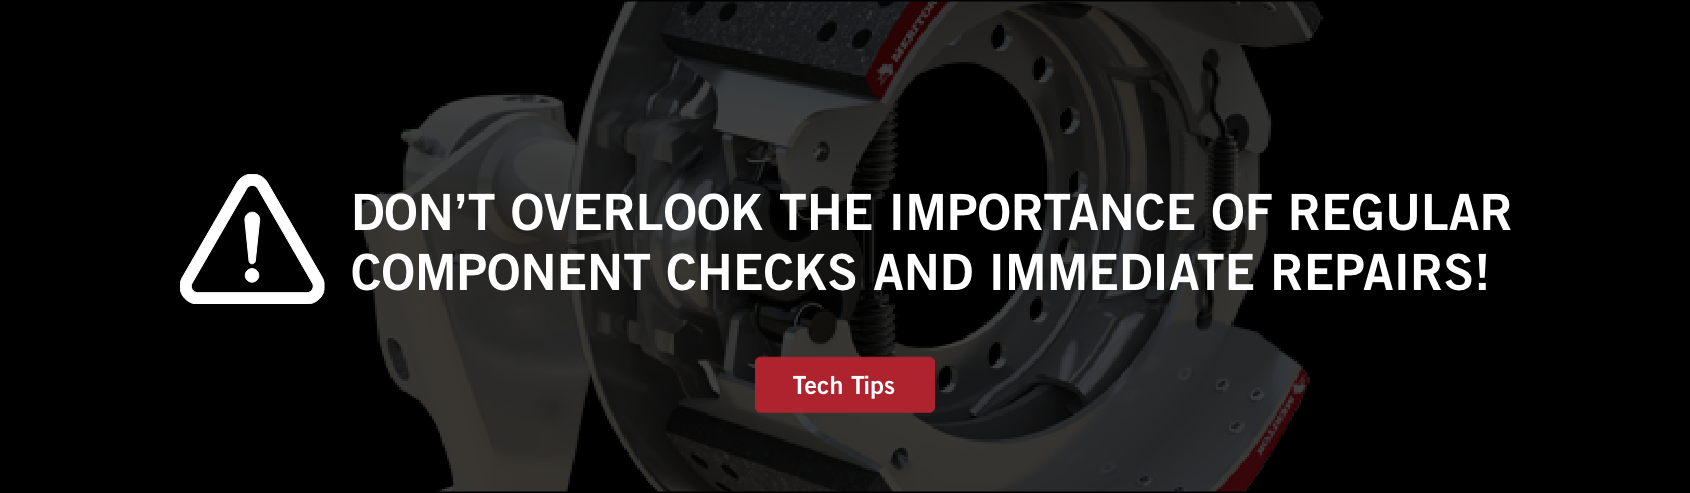 DON’T OVERLOOK THE IMPORTANT OF REGULAR COMPONENT CHECKS AND IMMEDIATE REPAIRS!